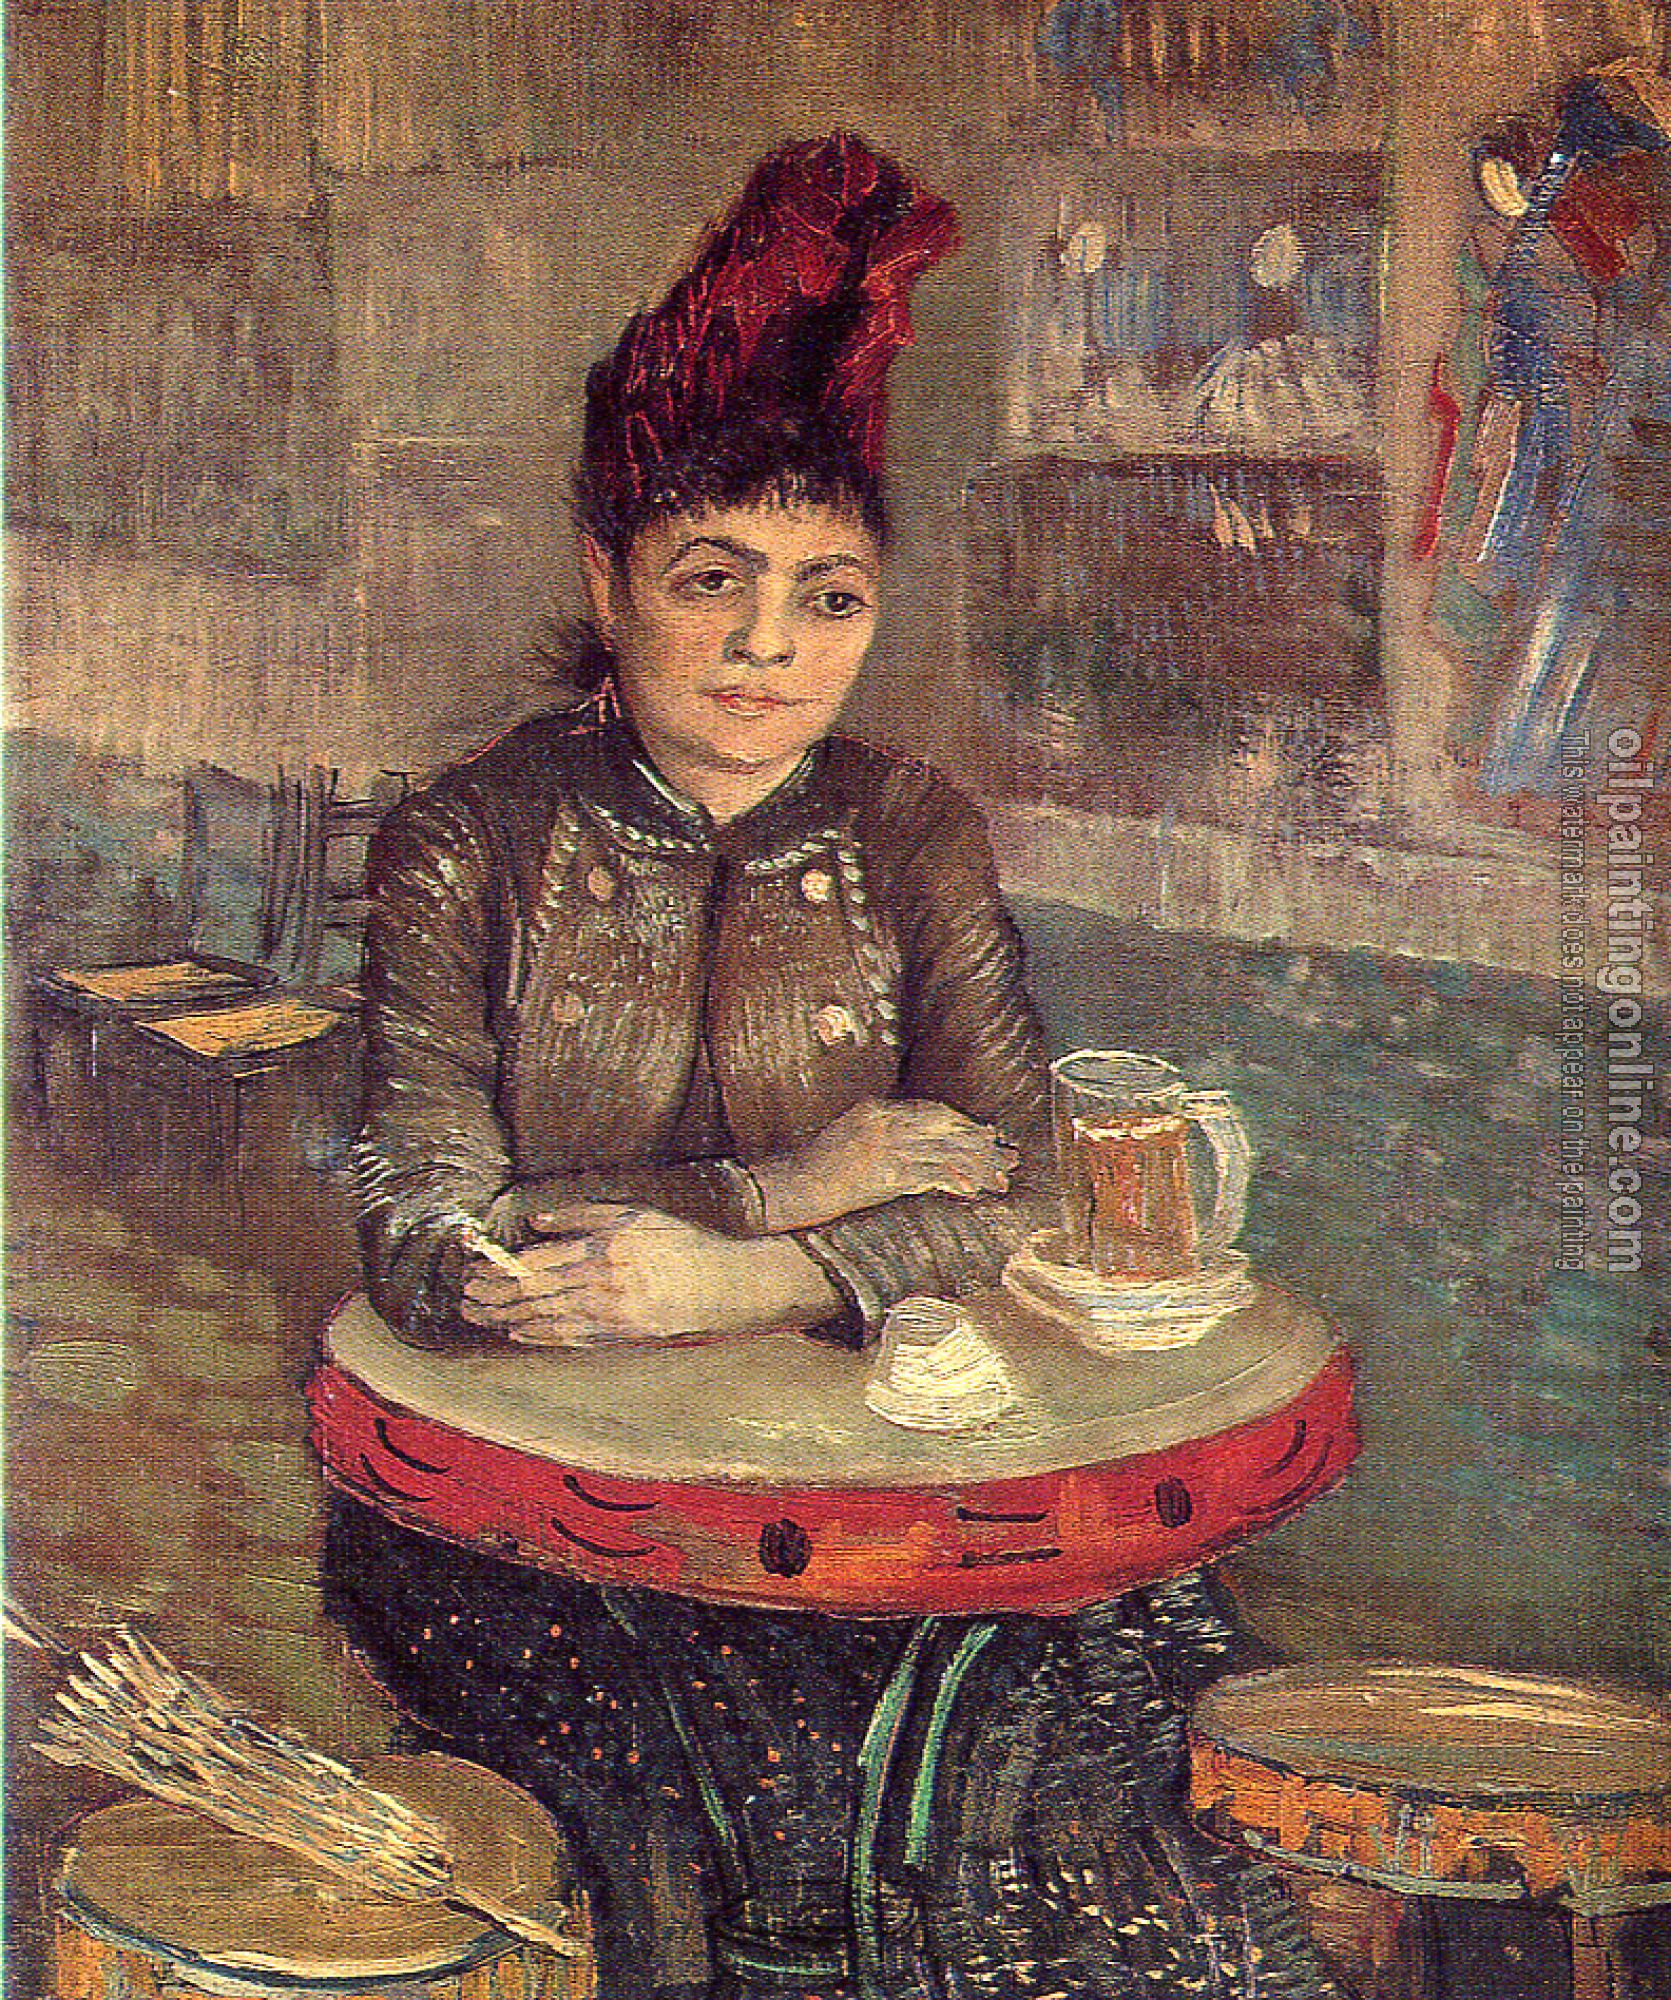 Gogh, Vincent van - Woman at a Table in the Cafe du Tambourin